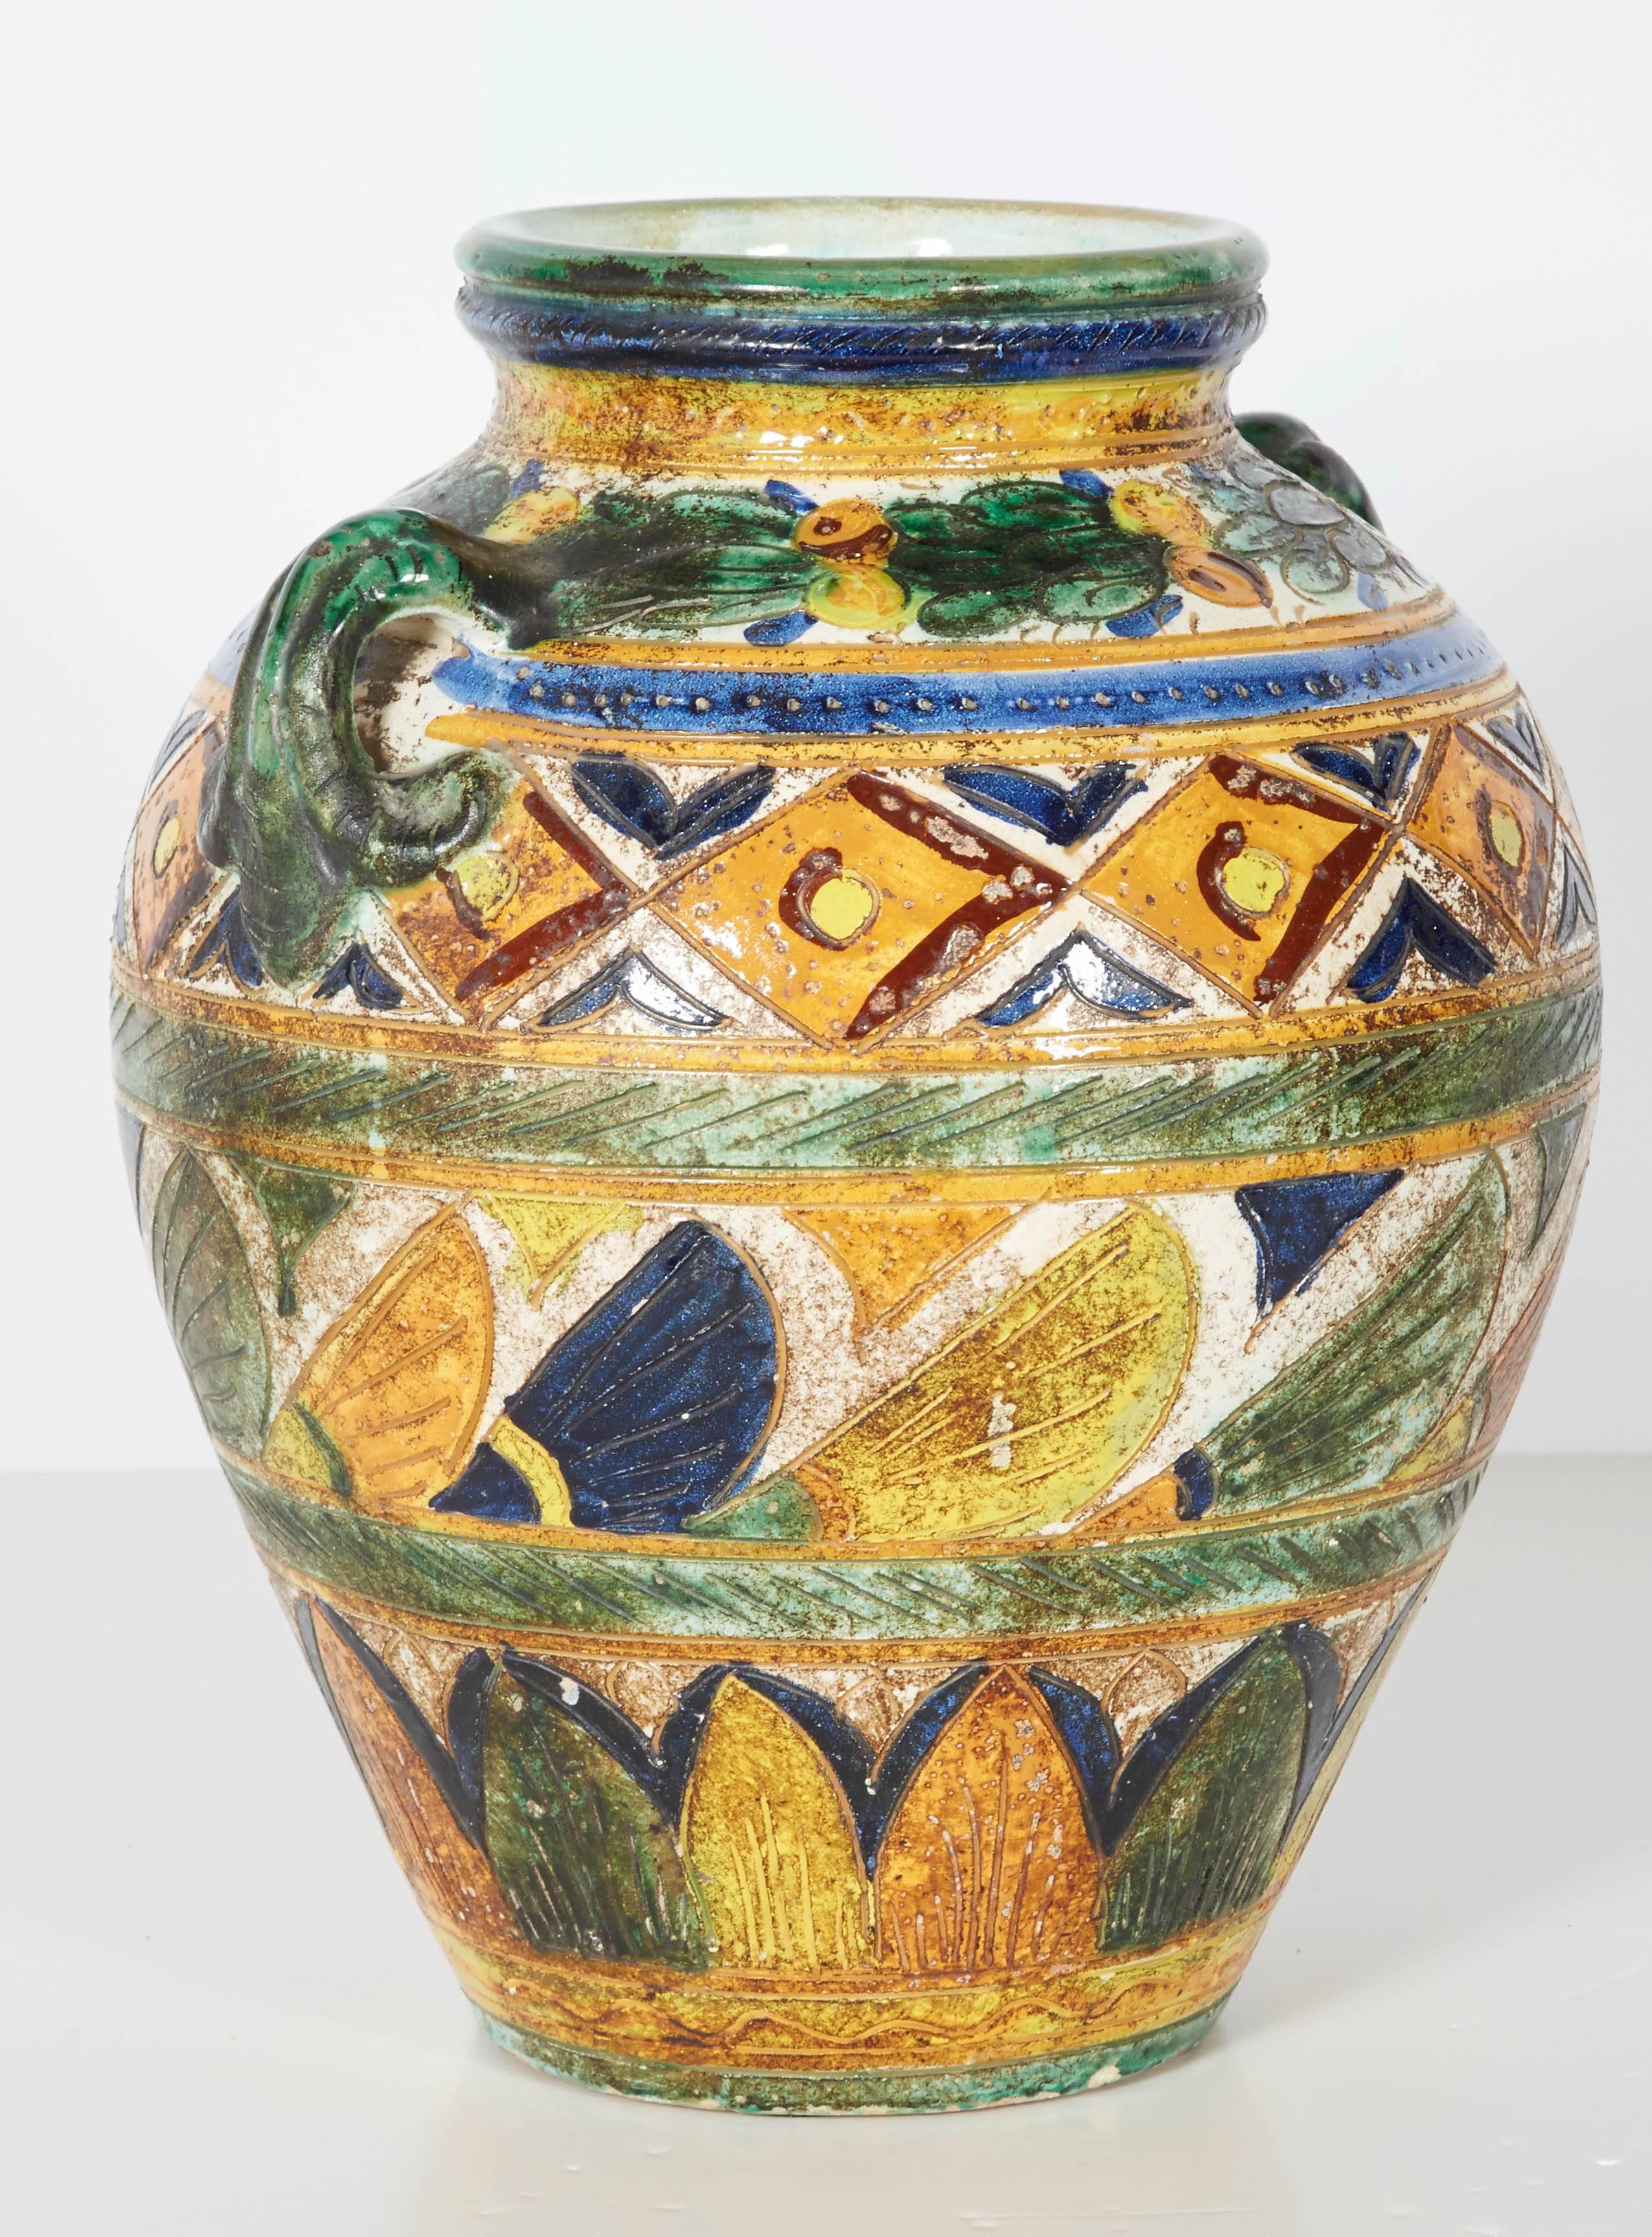 Wonderful large vase done in an etruscan motif. This eye catching piece is executed in a colorful, earthy, textured finish. Please contact for location. 